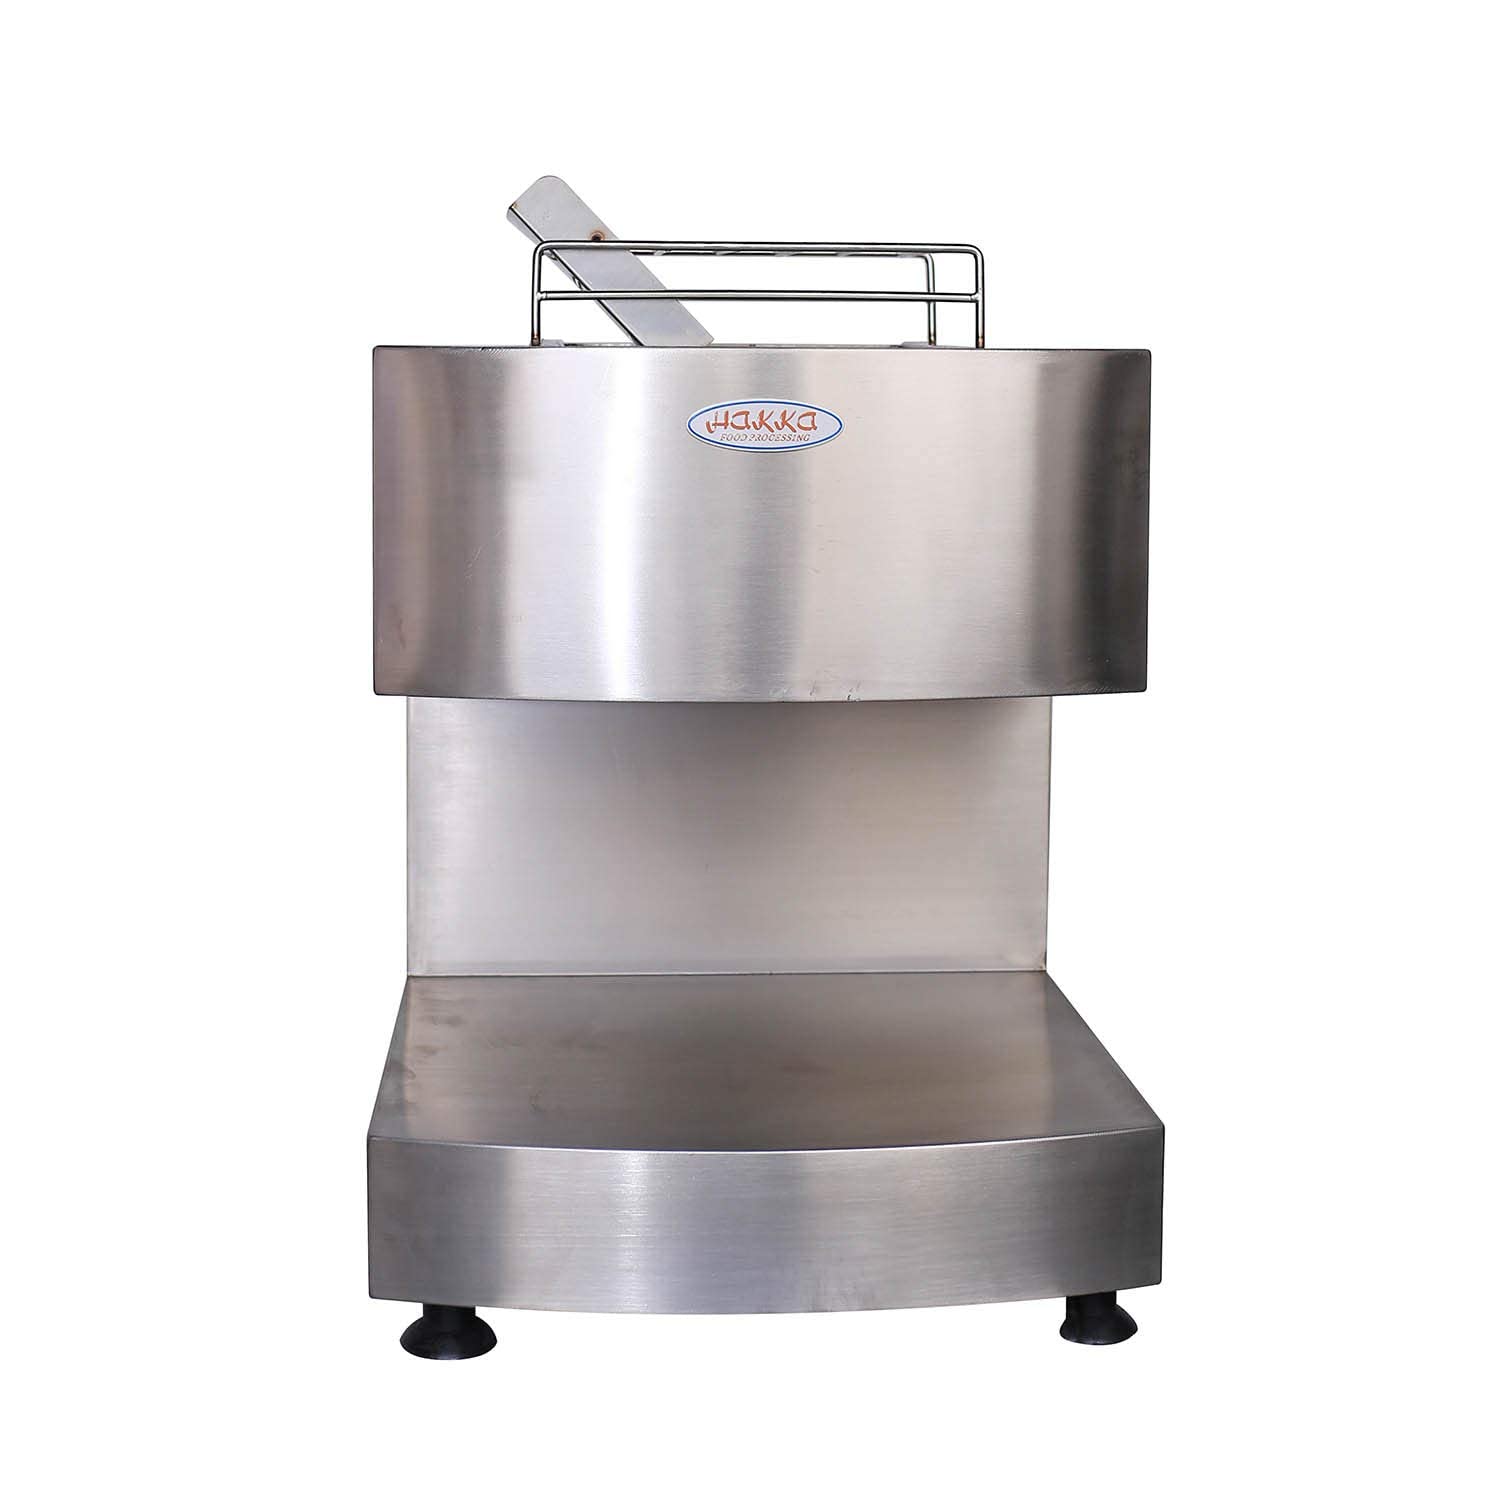 Professional electric slicer with 300mm stainless steel blade